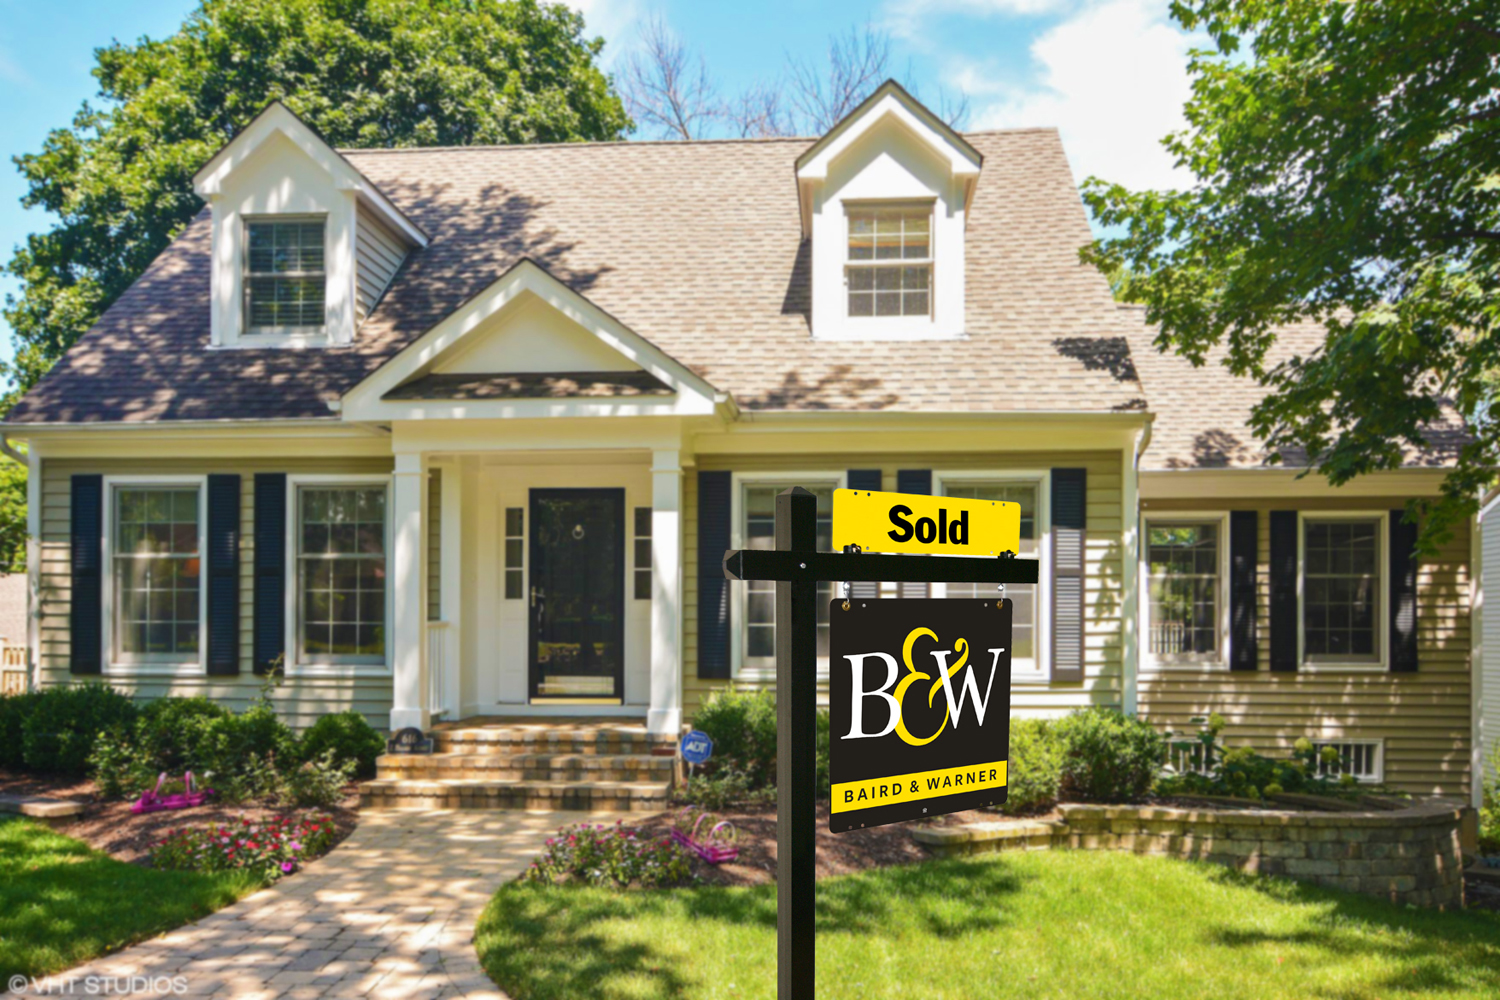 Sold home sign from Baird & Warner